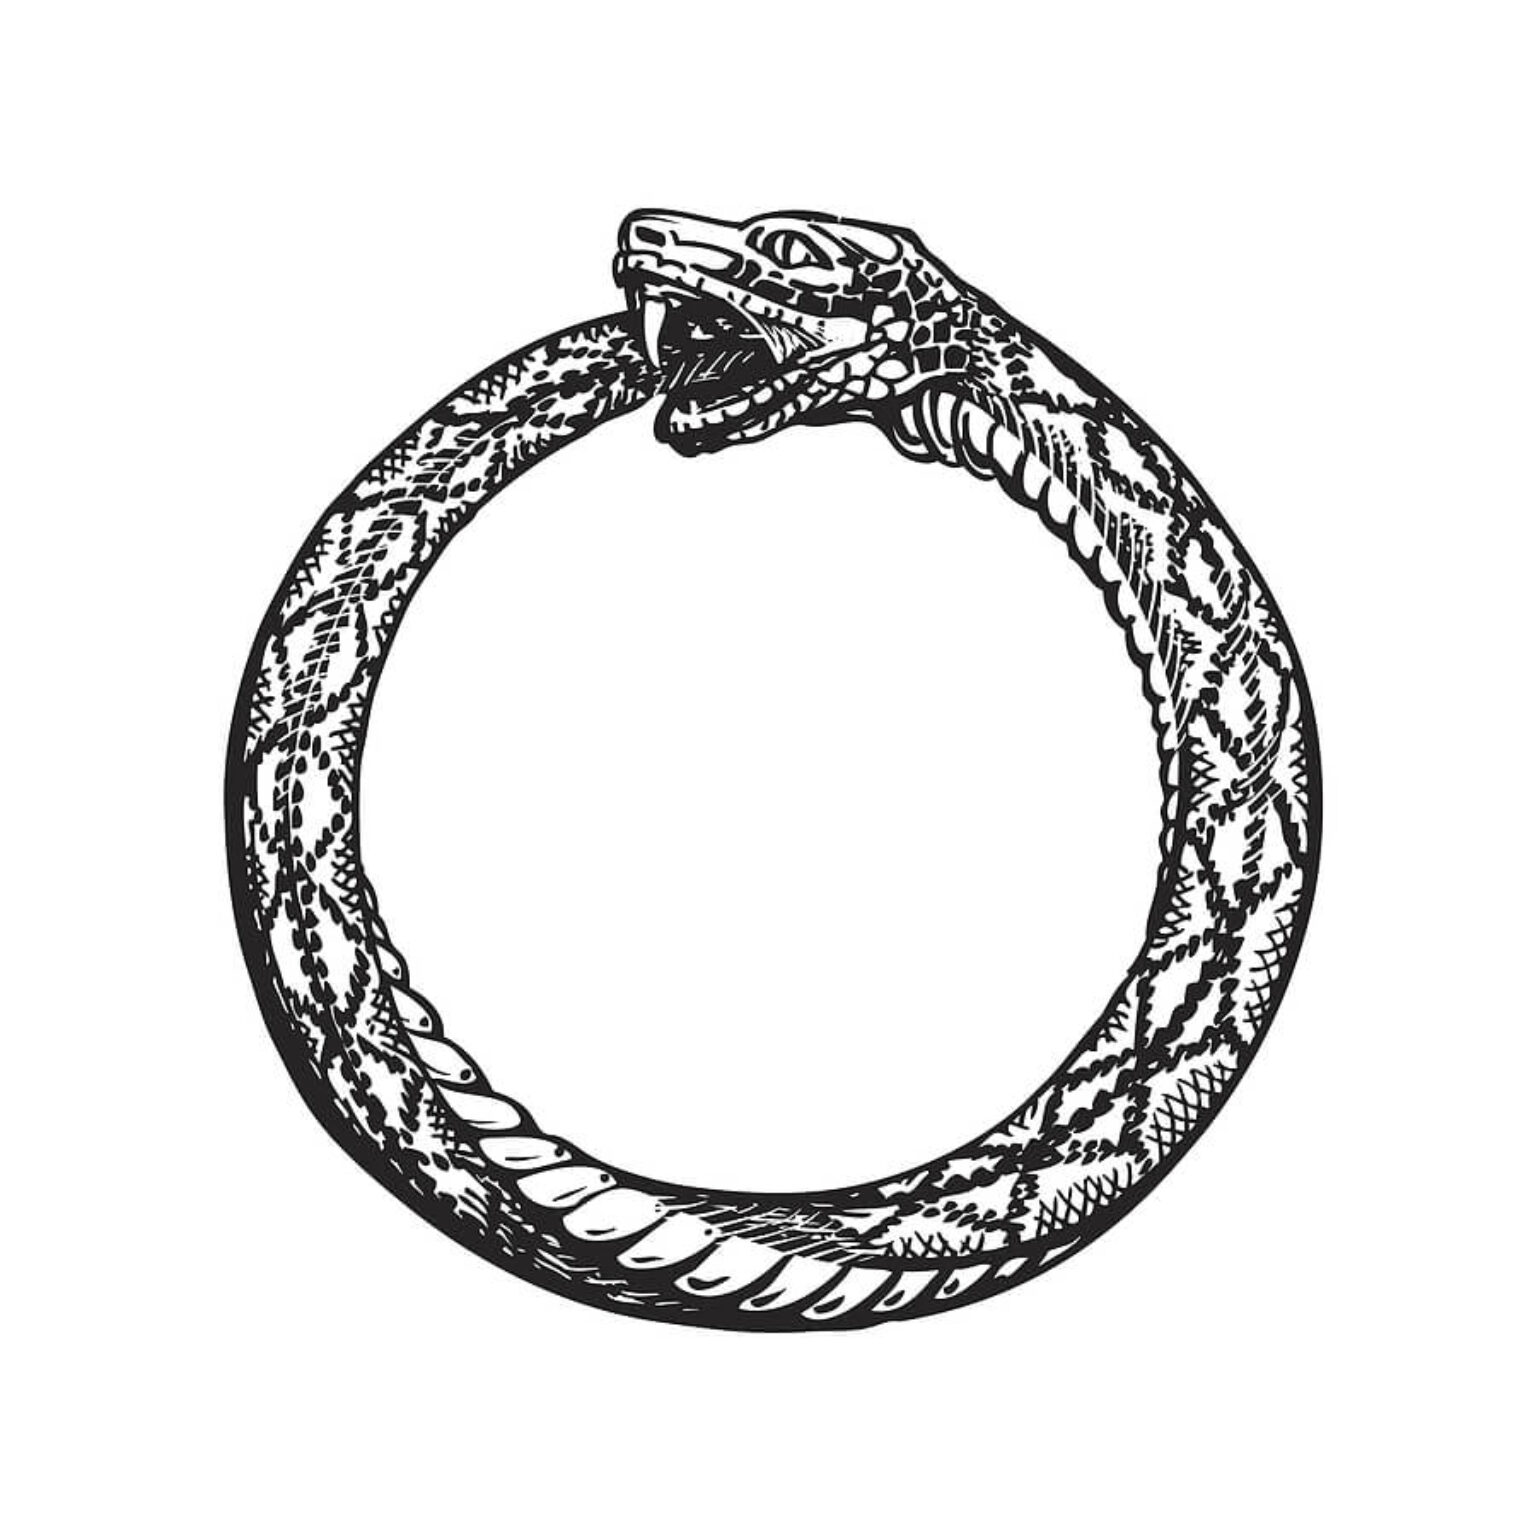 Ouroboros Symbol Meaning, Interesting Facts and Origins